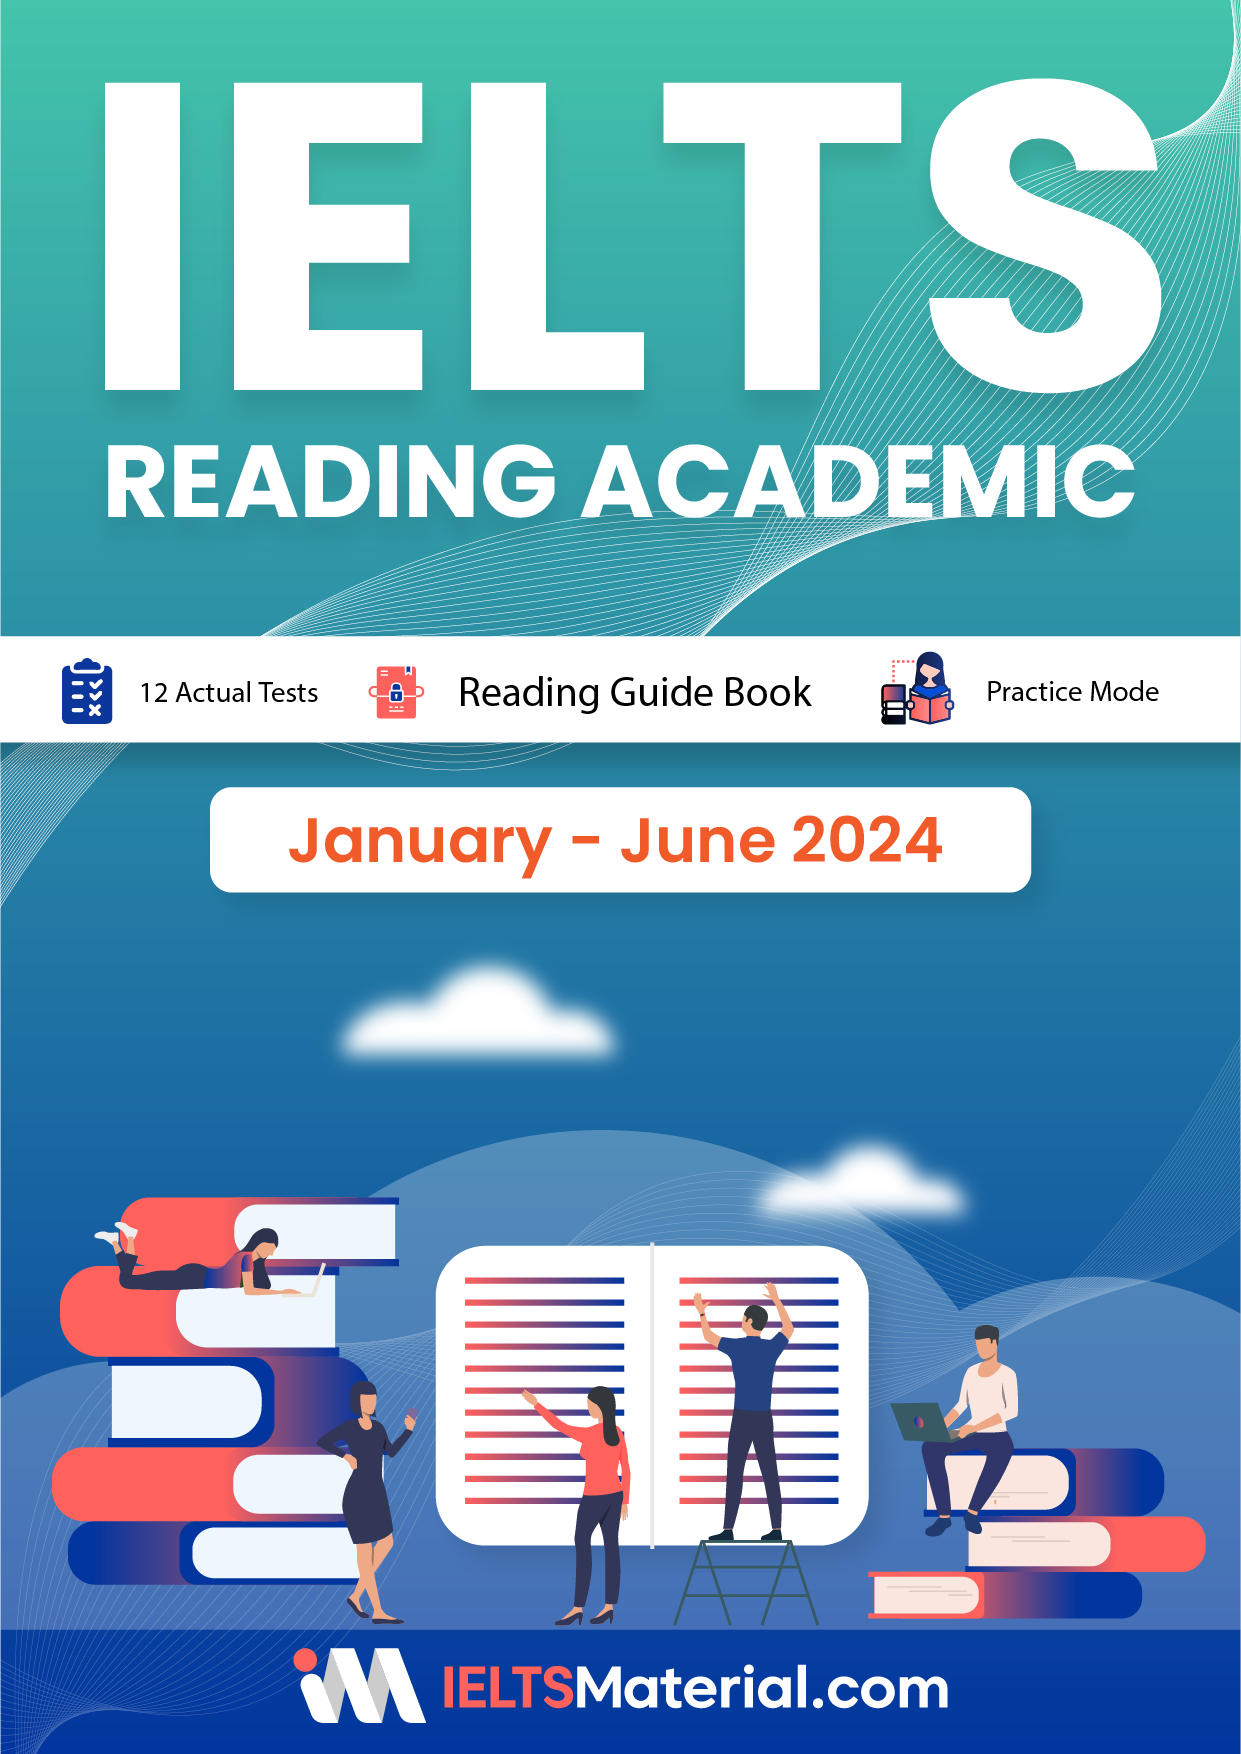 IELTS Reading Academic Test Guide: Essential Tips, Strategies, and Practice Tests” (January-June 2024)